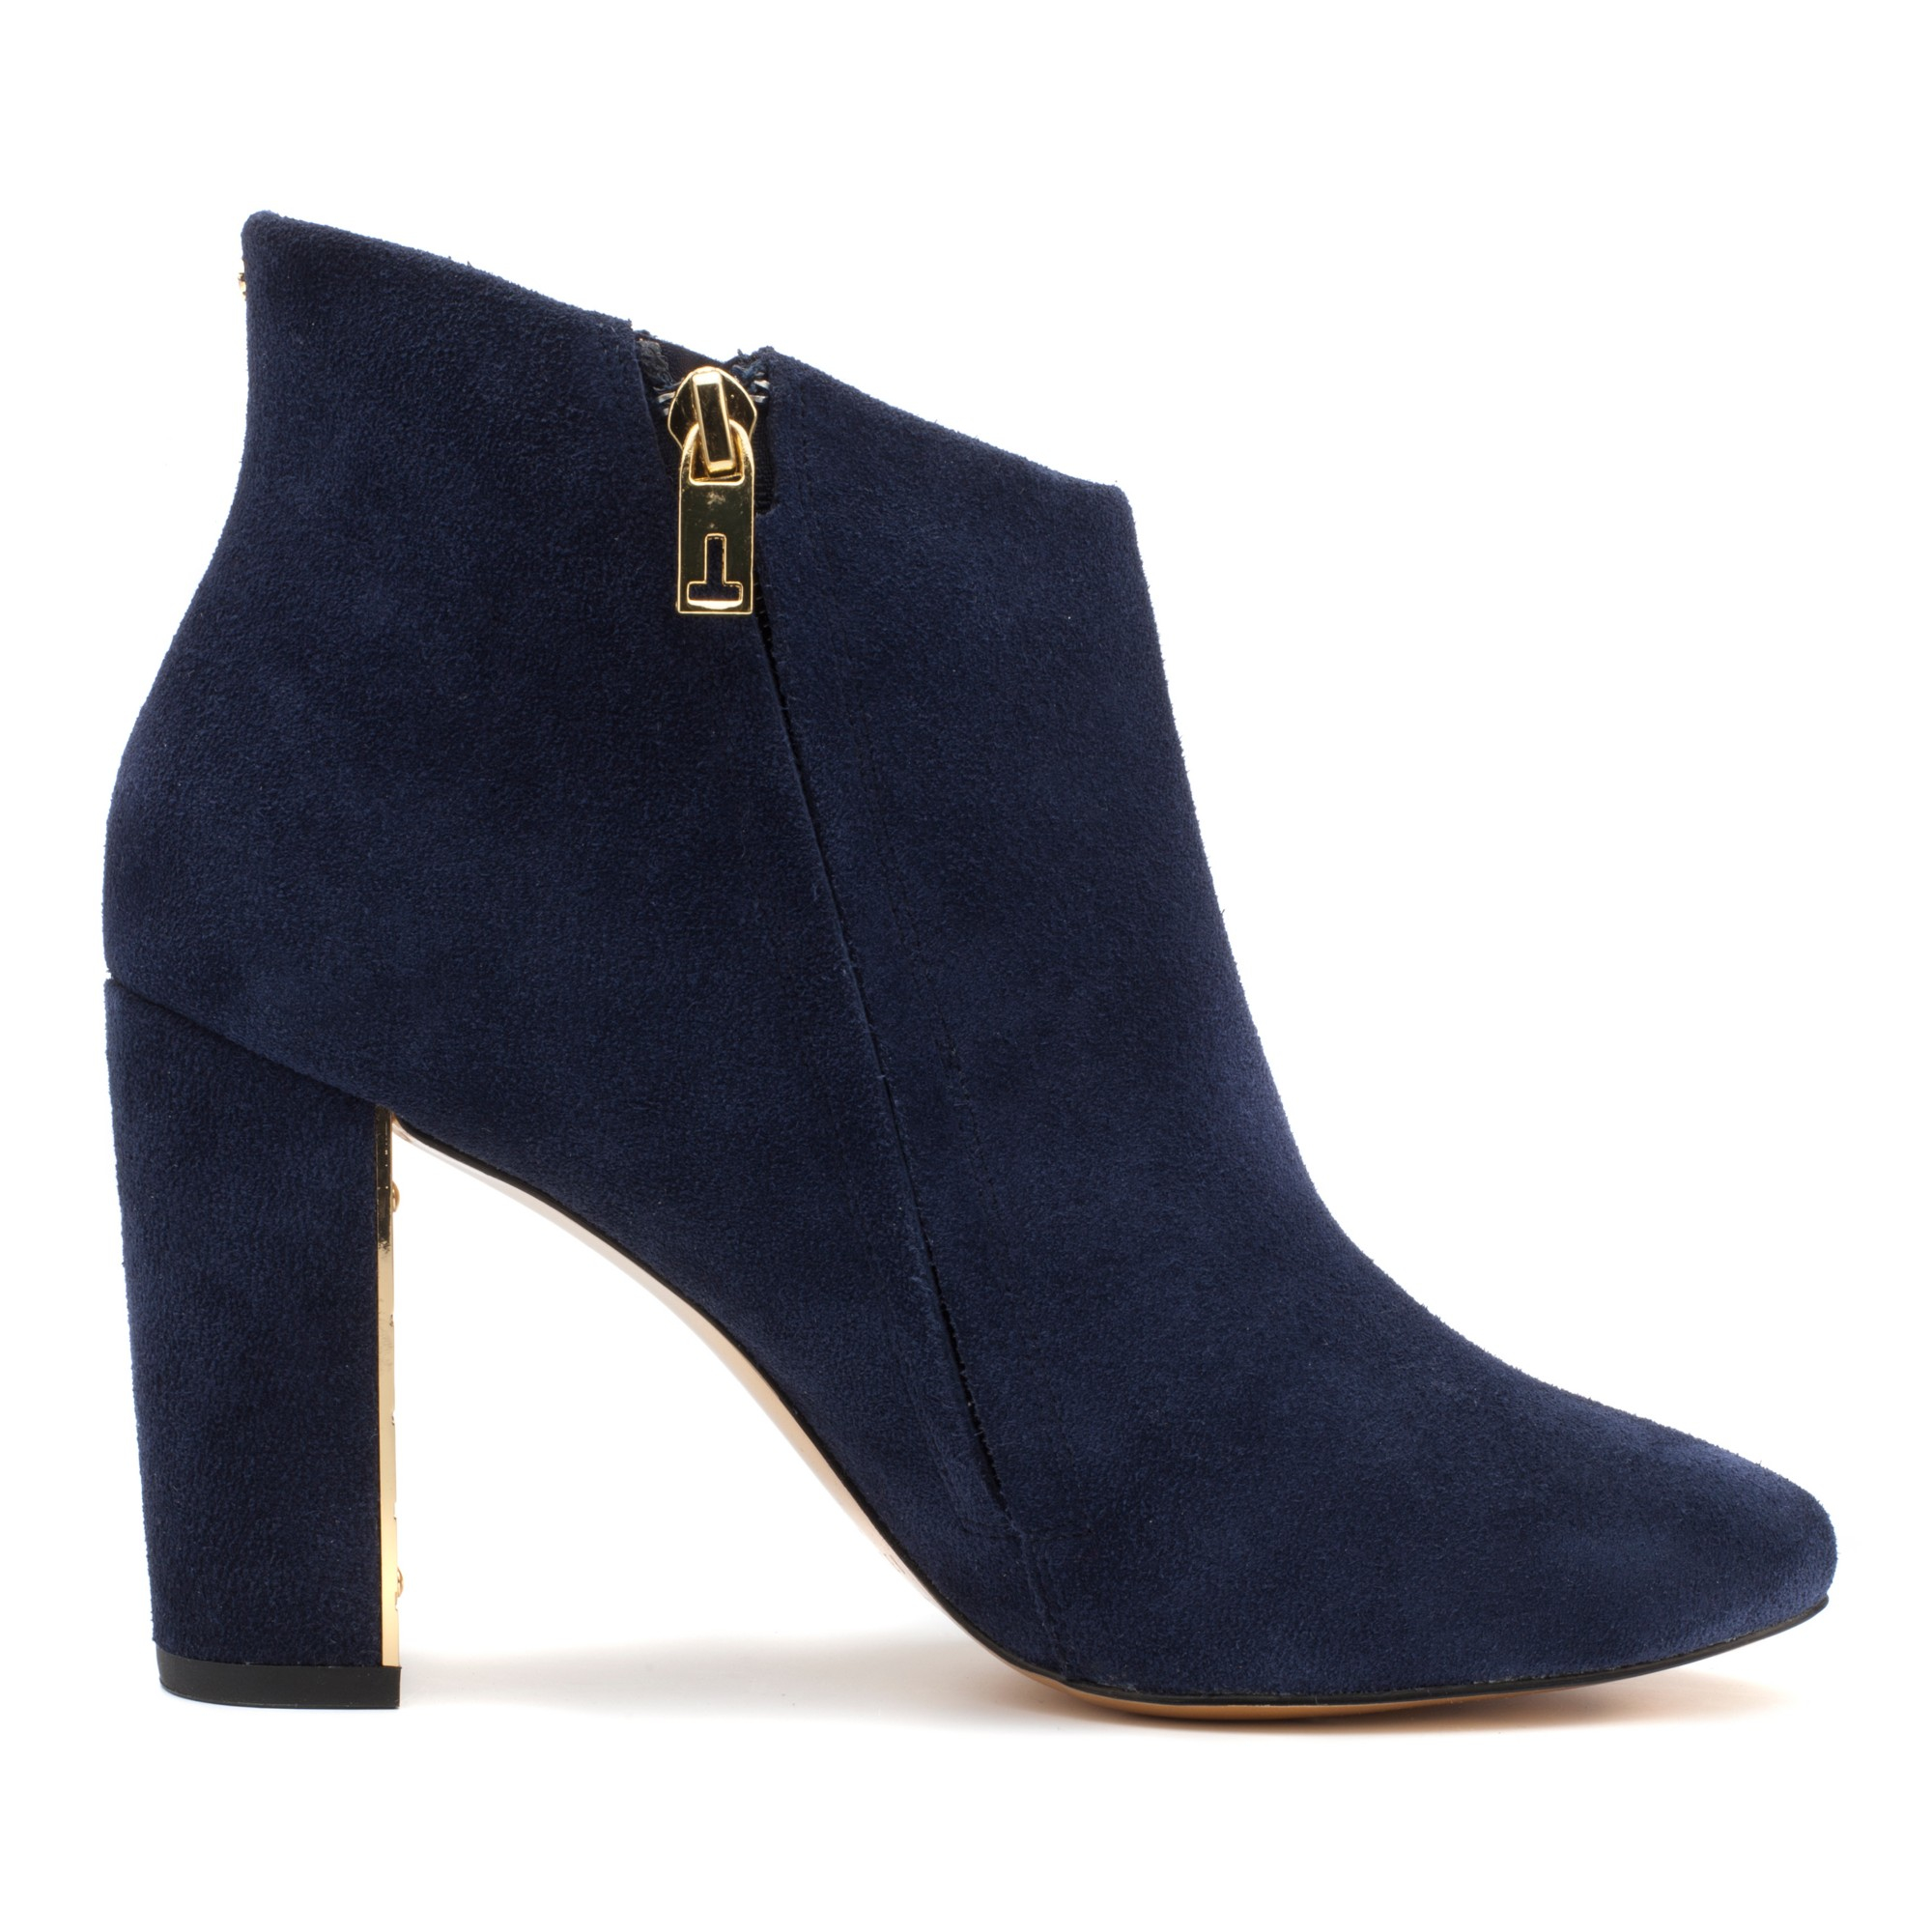 Ted Baker Suede Lowrenna Ankle Boots in Blue Suede (Blue) - Lyst